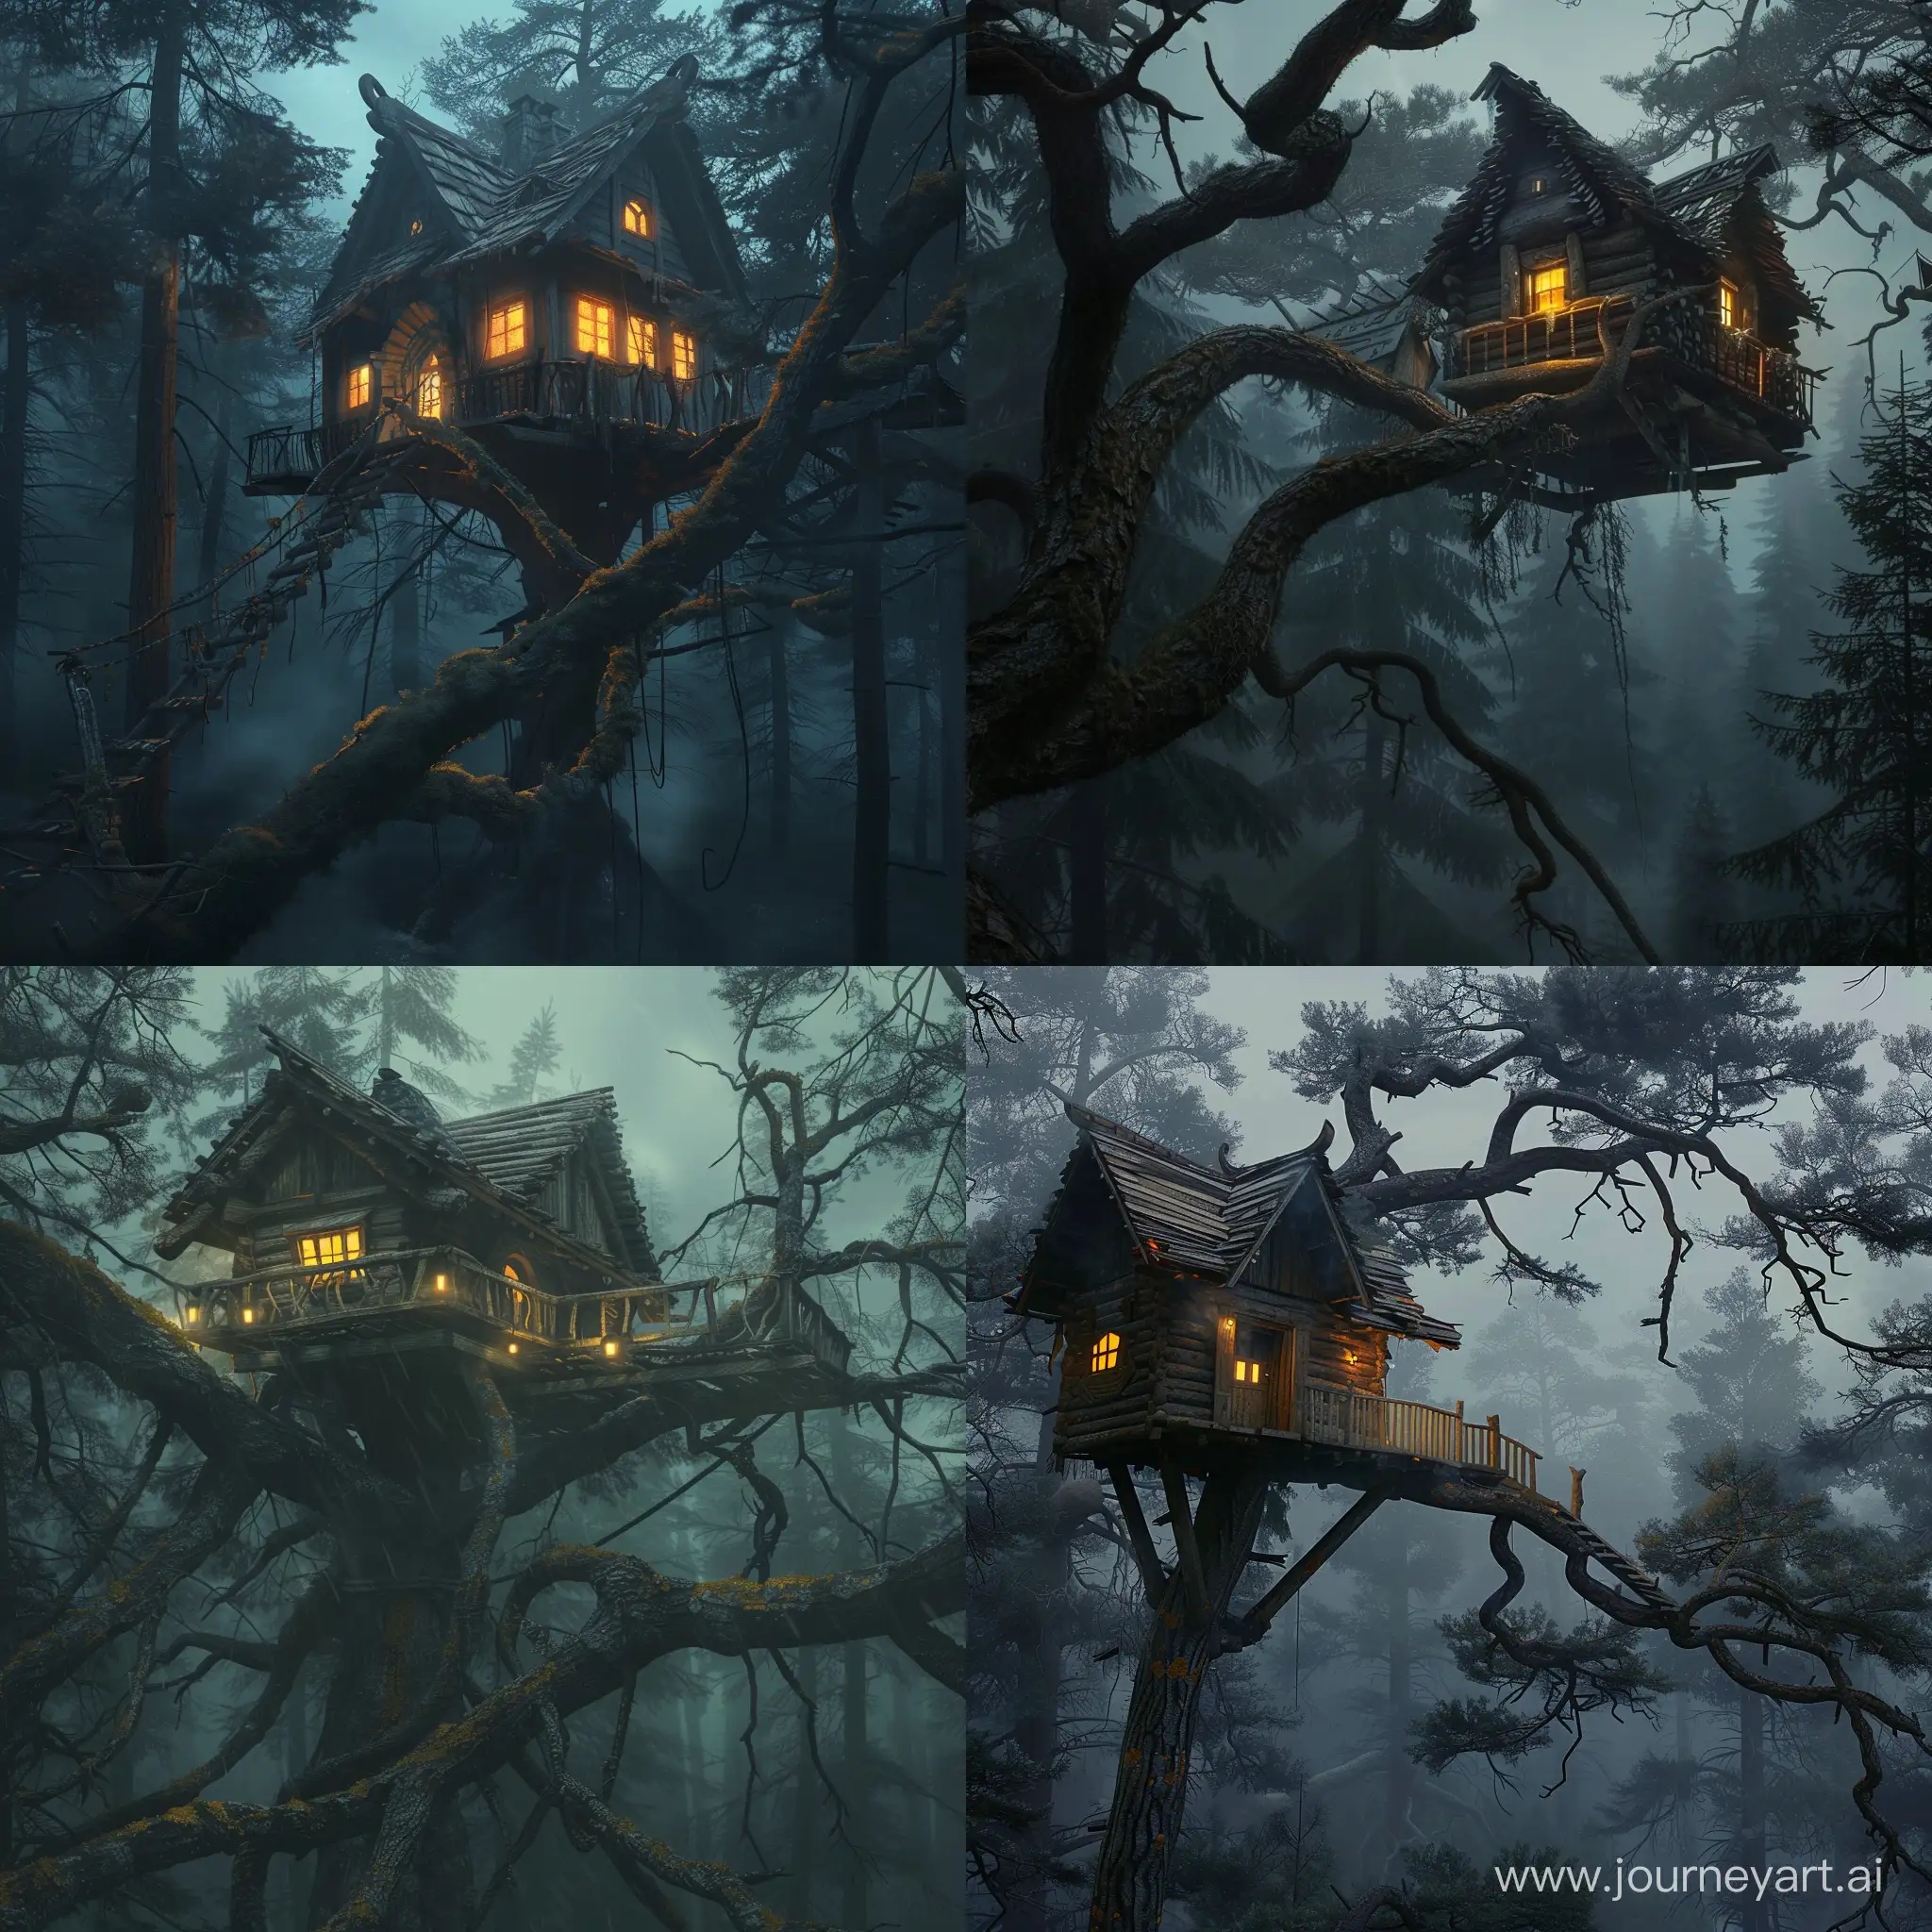 Beautifully lit slavic wooden house built in the branches of a tree in dark moody forest, concept art, atmospheric, foggy, cinematic, masterpiece, woodlands, mystery, nordic forest